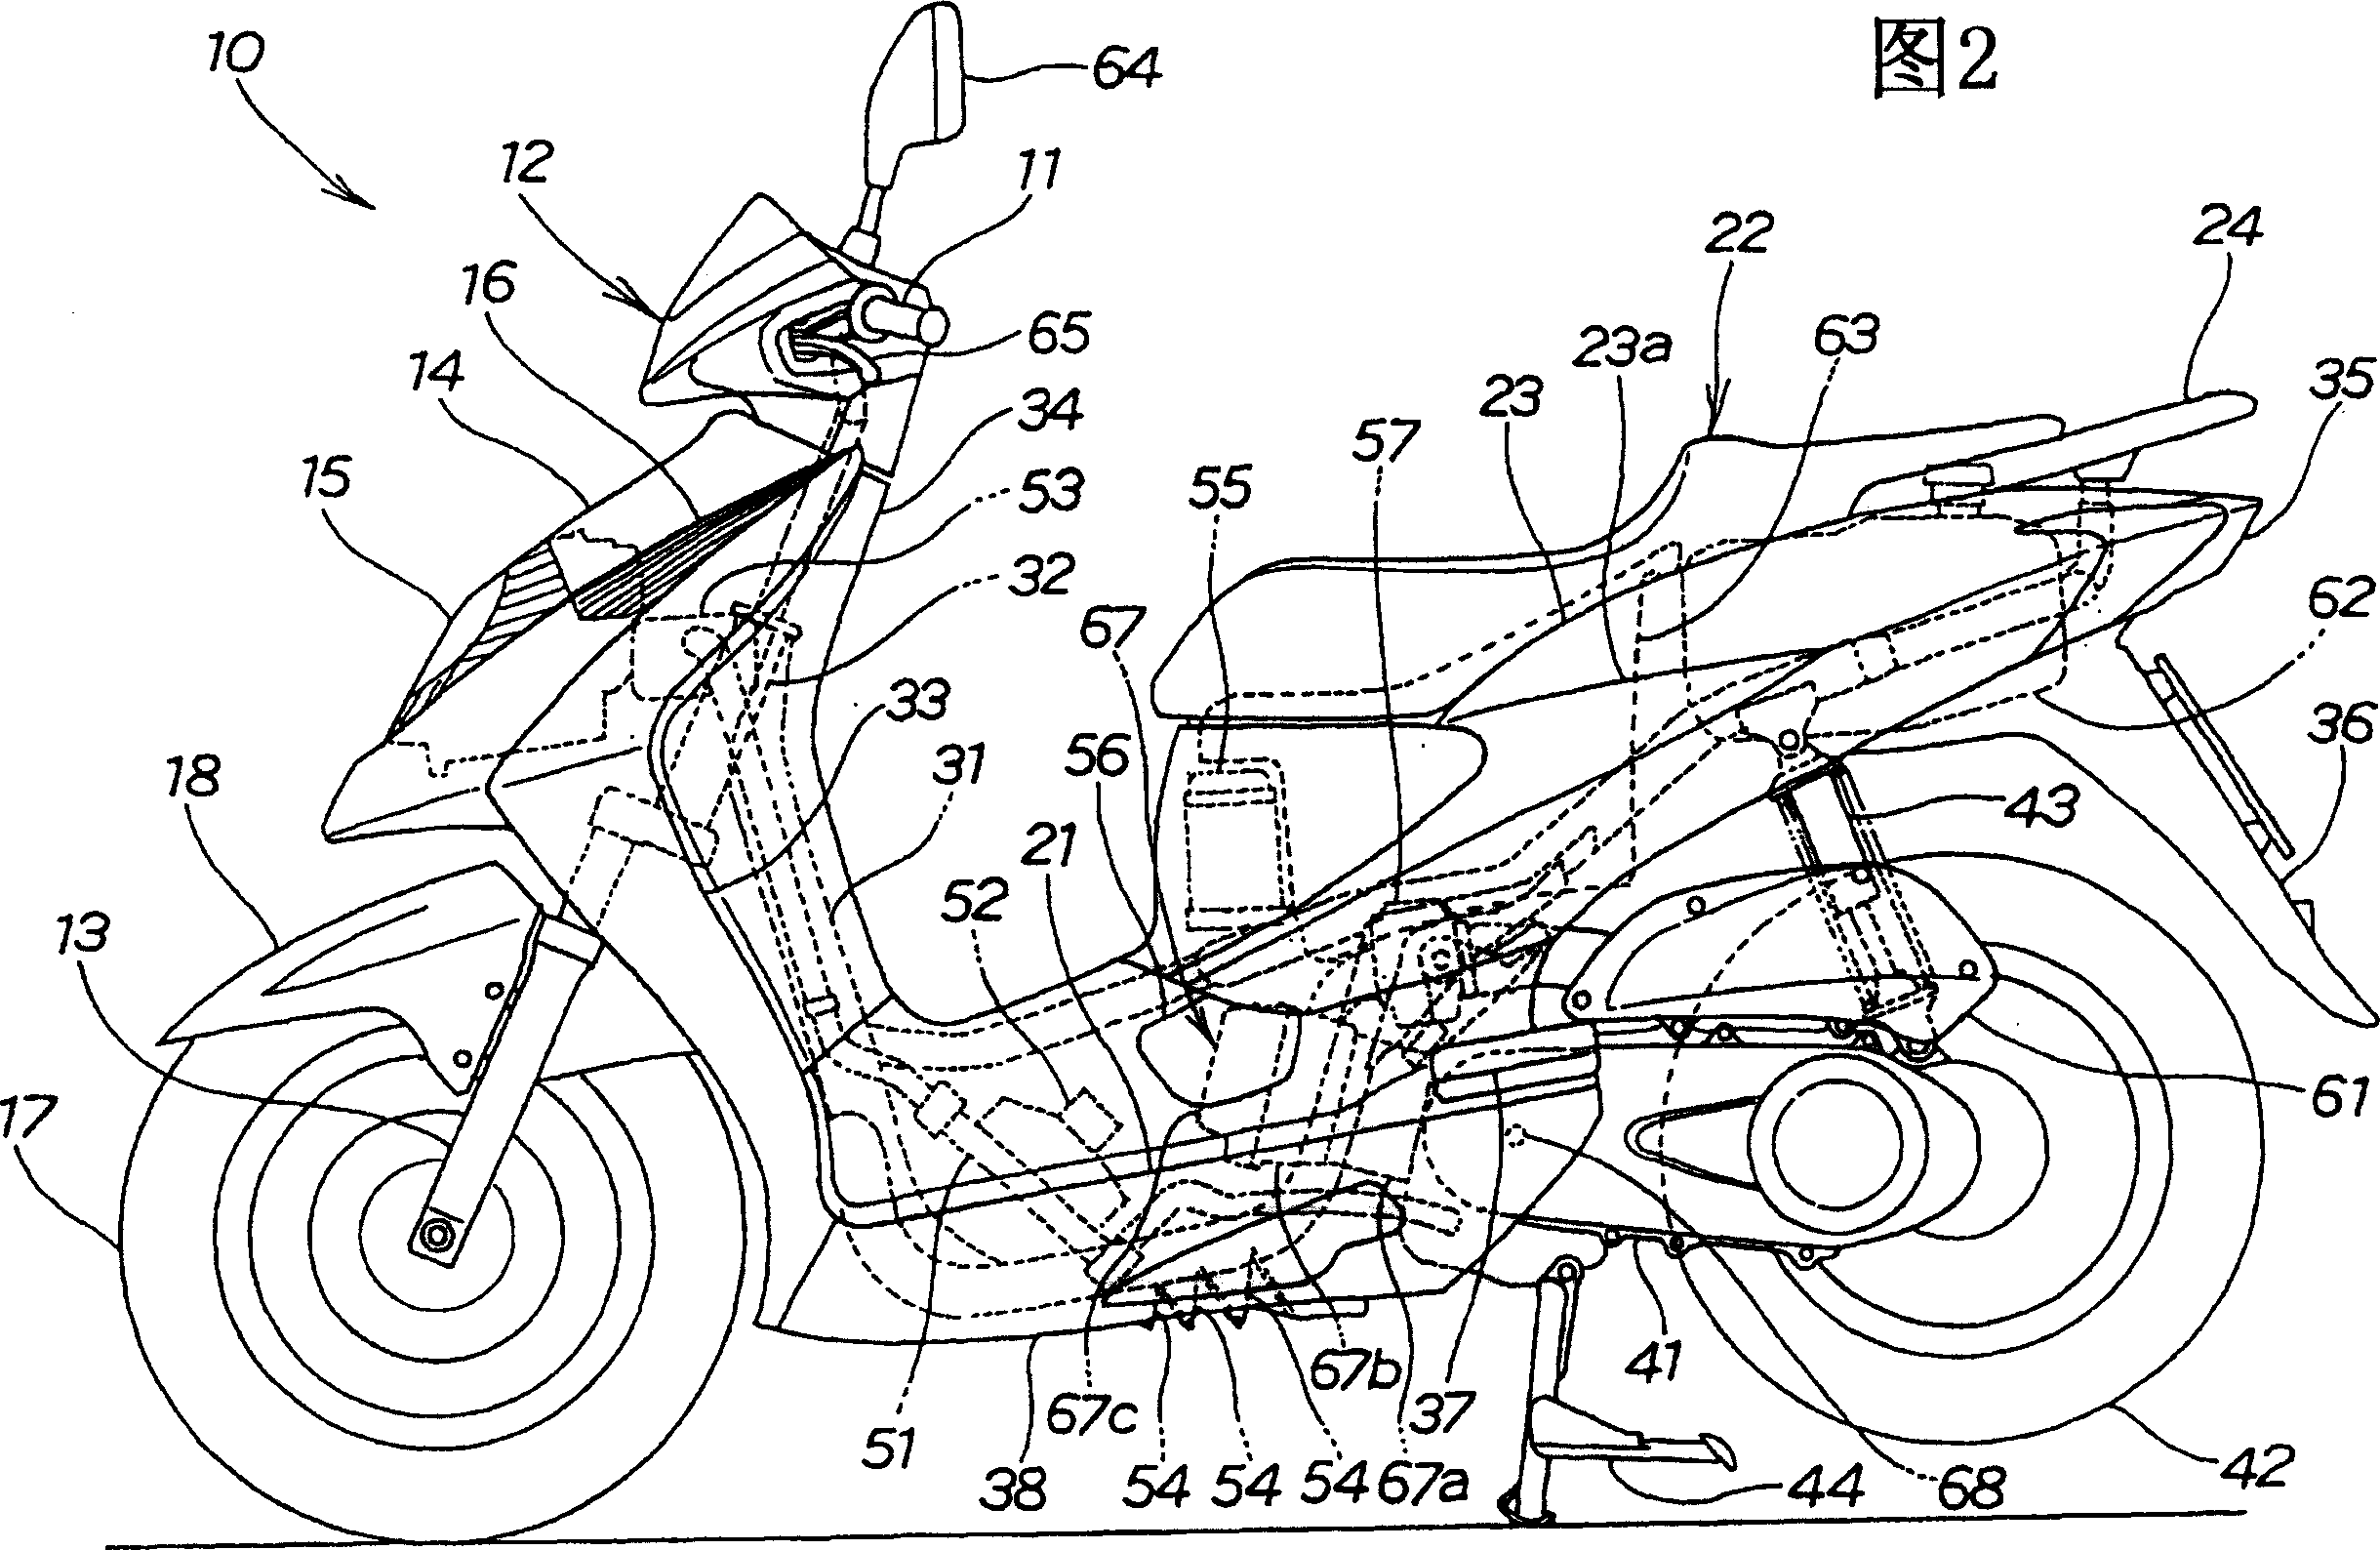 Rear structure of bicycle